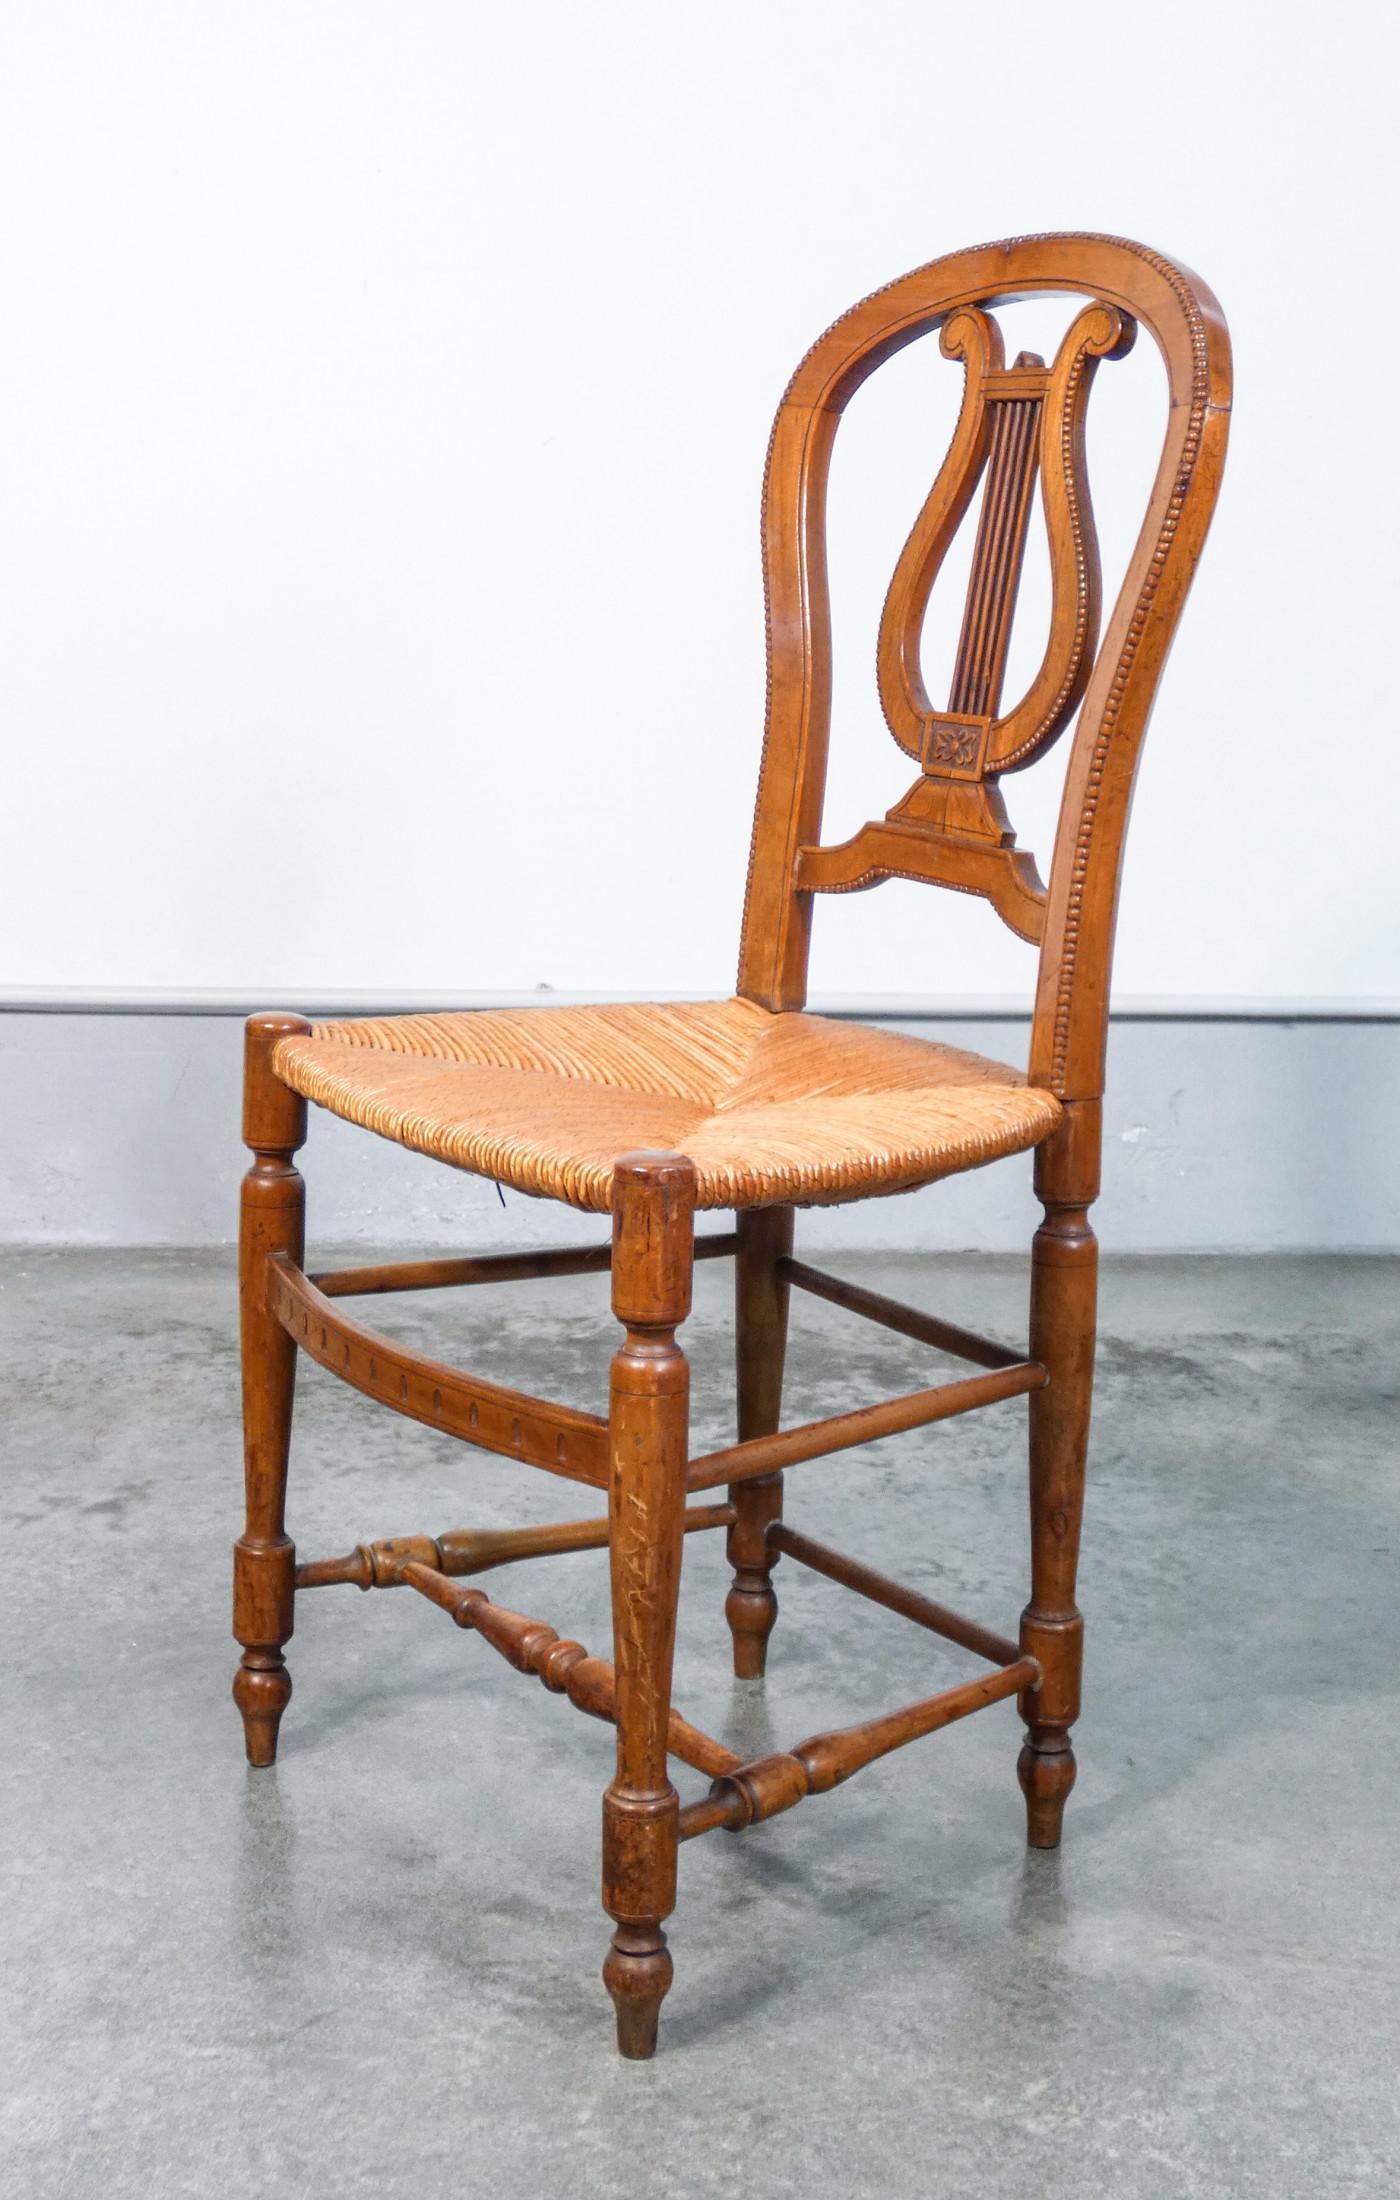 Pair of Cherry Wood Chairs with Lyre-Shaped Back and Straw Seat, Early 20th For Sale 3